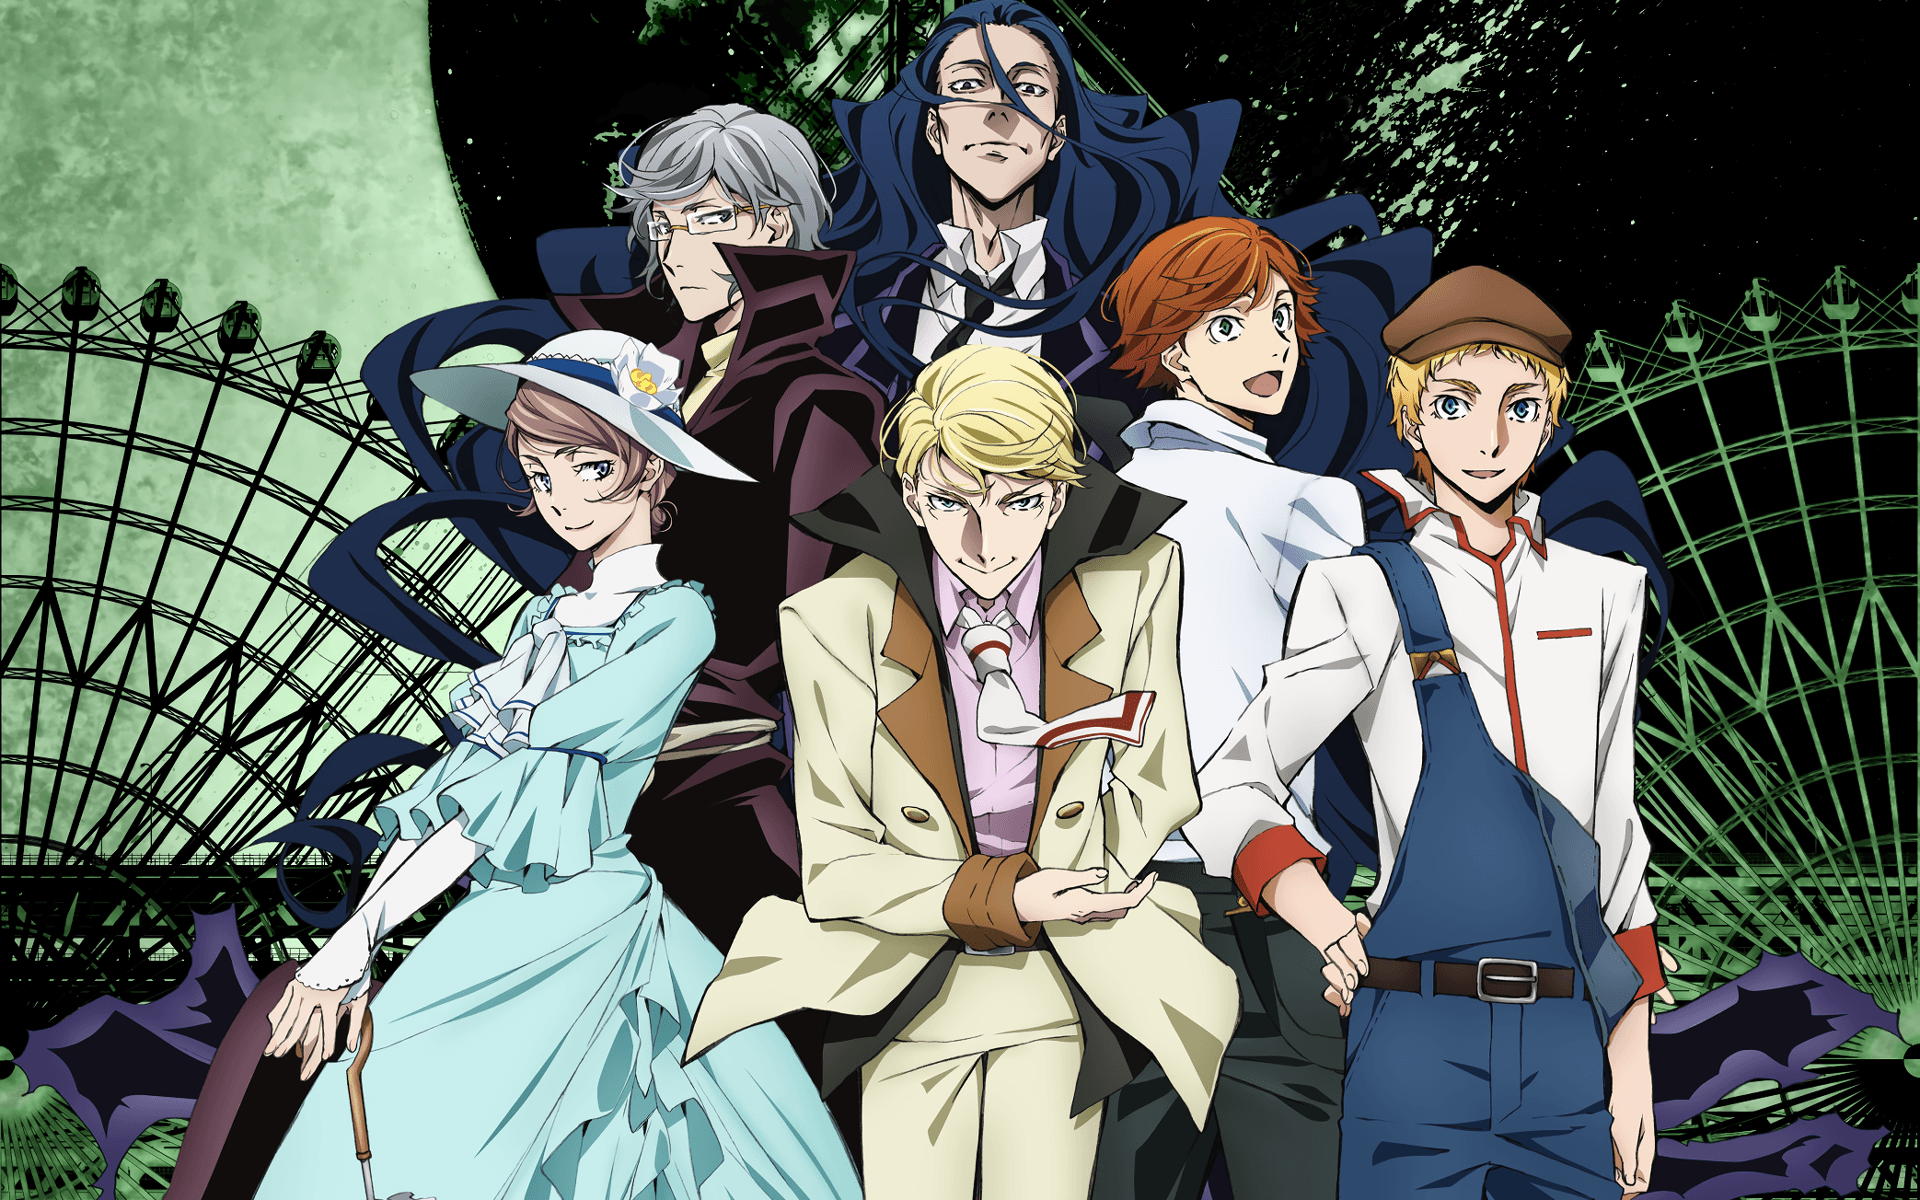 Bungou Stray Dogs HD Wallpaper. Background